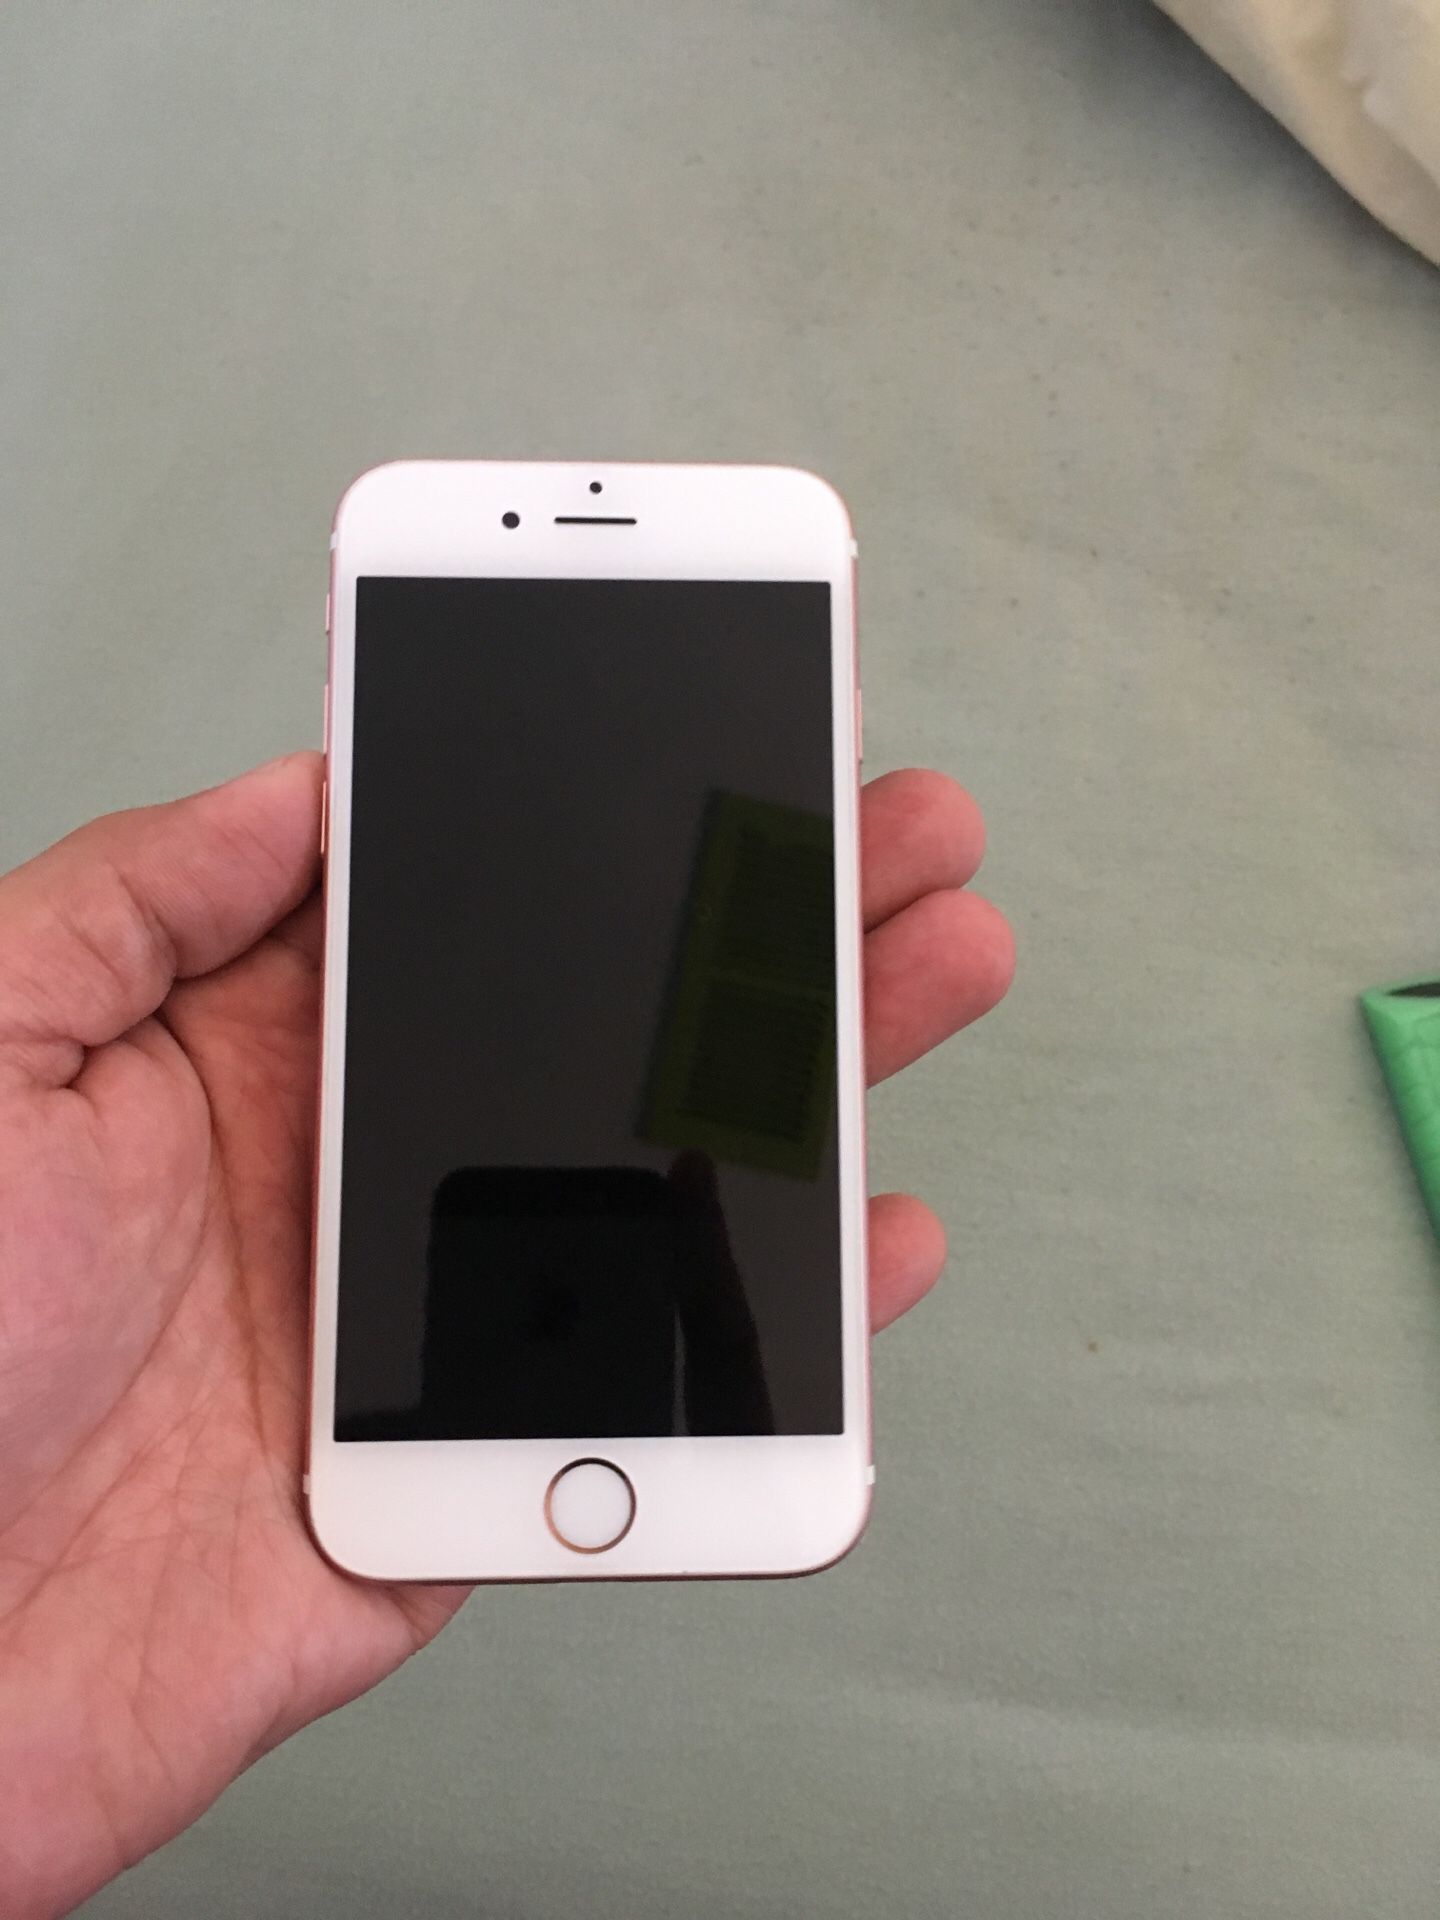 iPhone 6s stopped working even though it wAs still in box